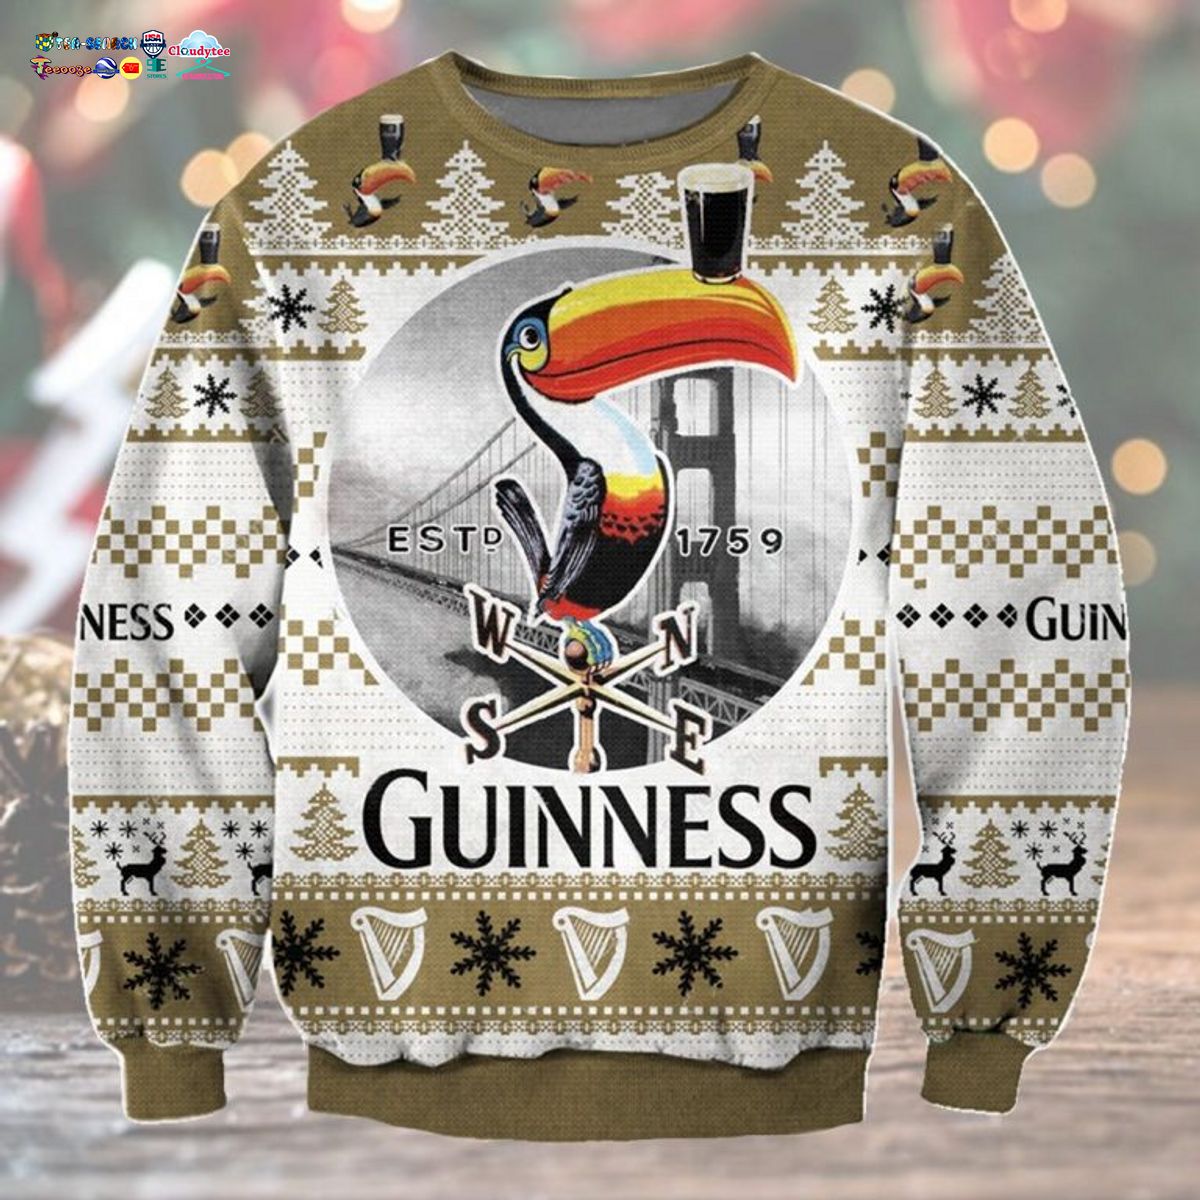 Guinness Ver 1 Ugly Christmas Sweater